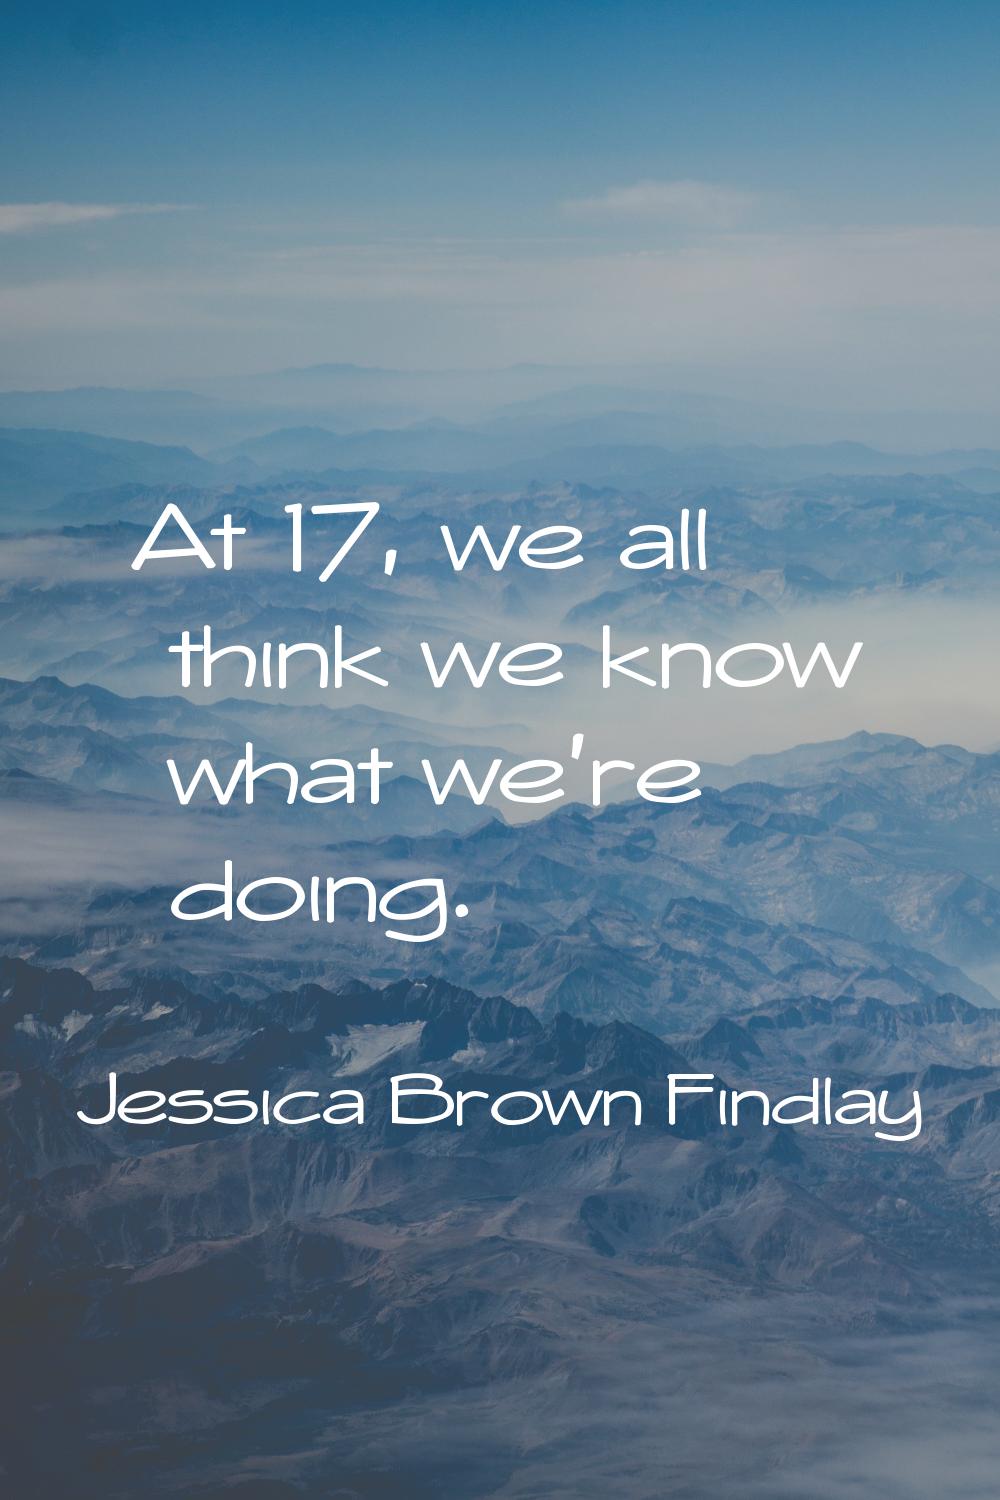 At 17, we all think we know what we're doing.